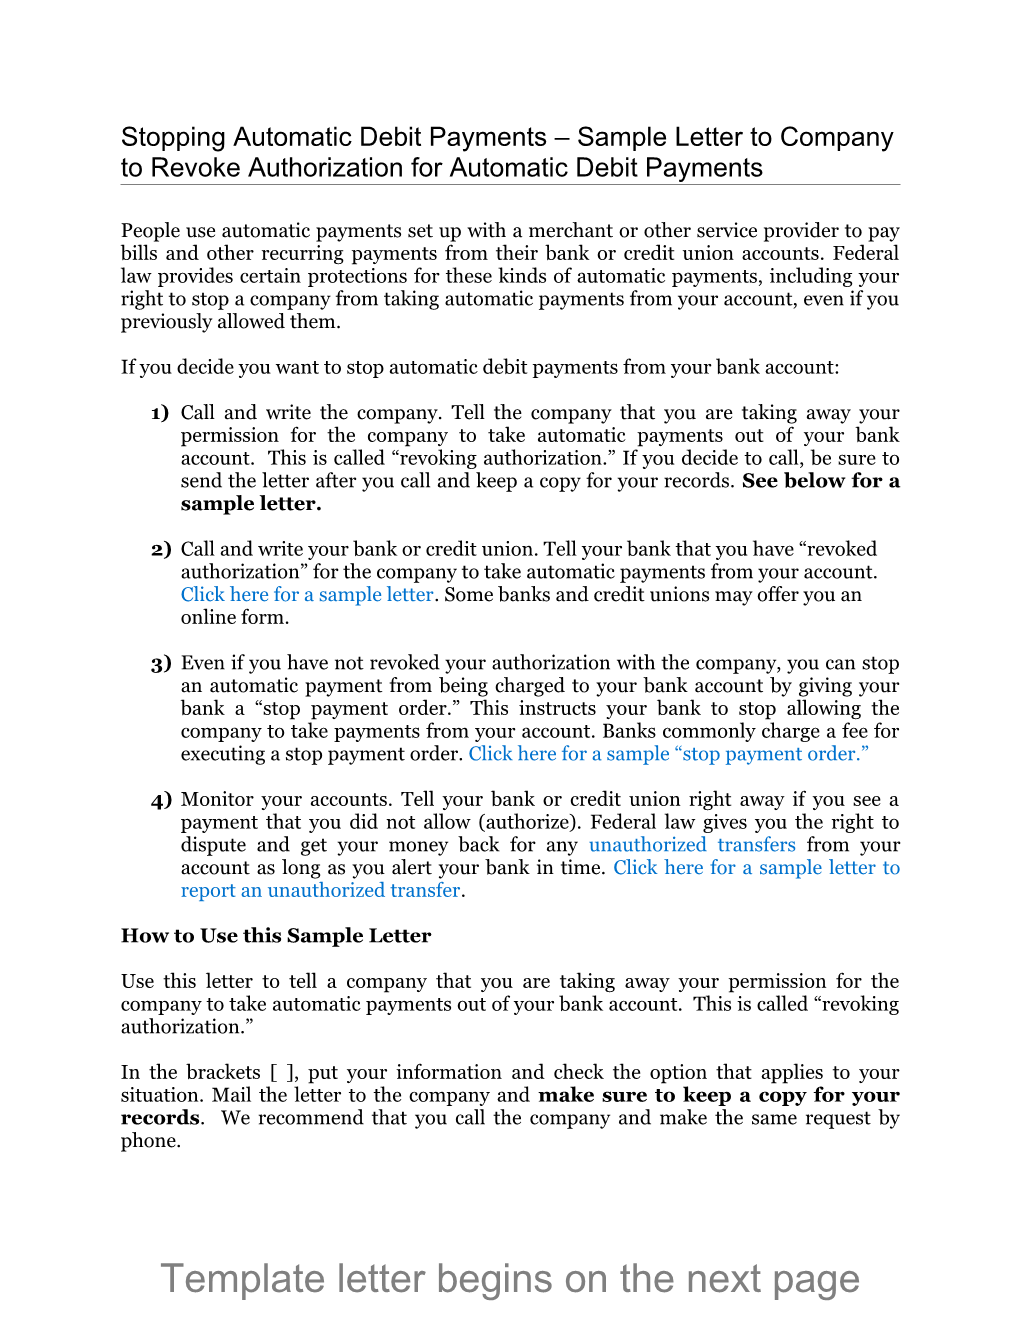 Stopping Automatic Debit Payments Sample Letter to Company to Revoke Authorization For